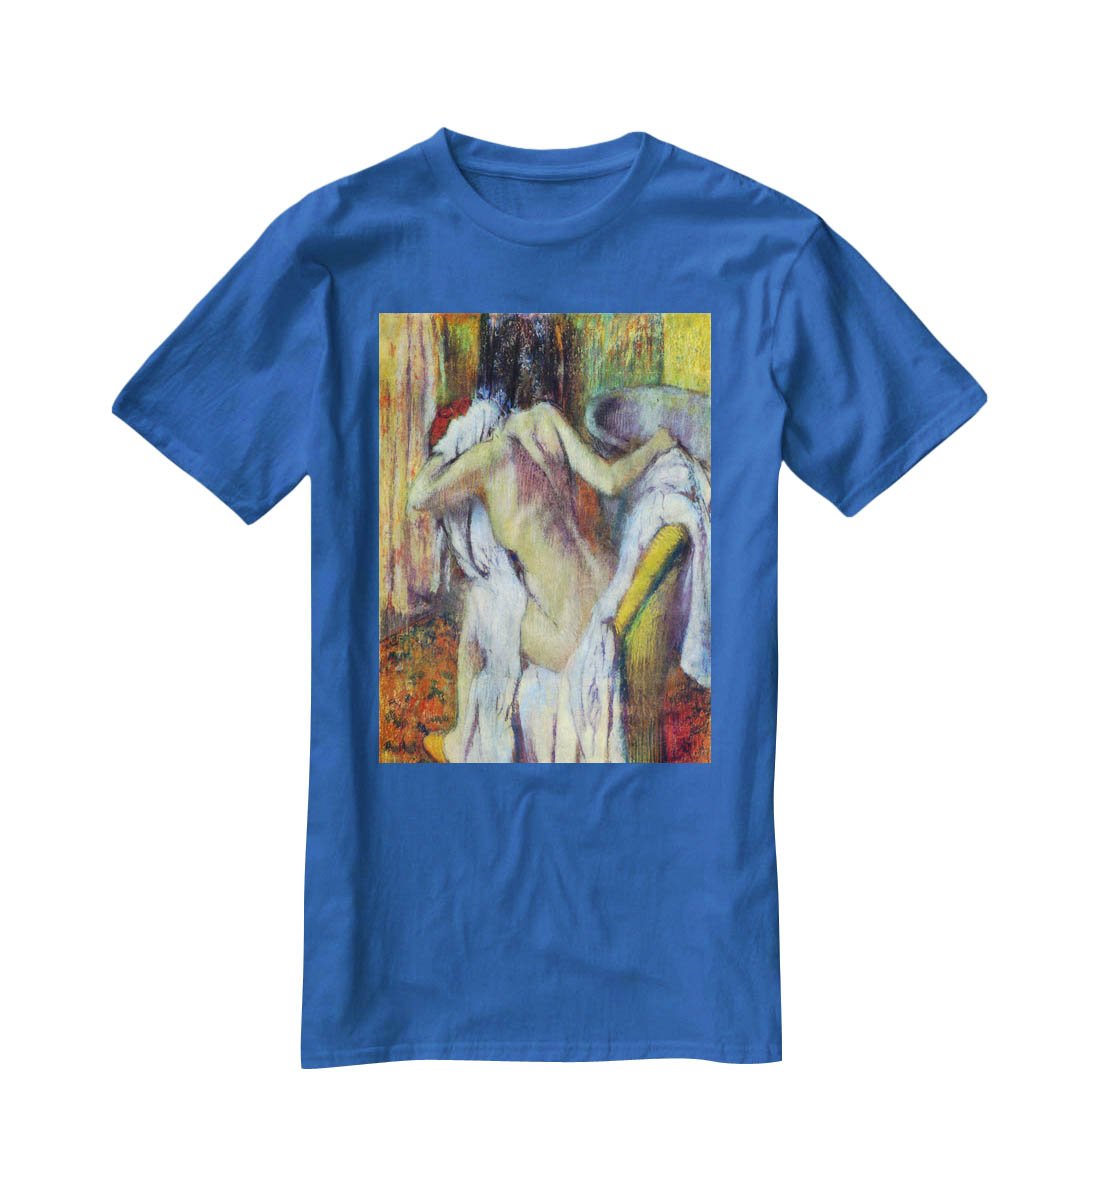 After Bathing 4 by Degas T-Shirt - Canvas Art Rocks - 2